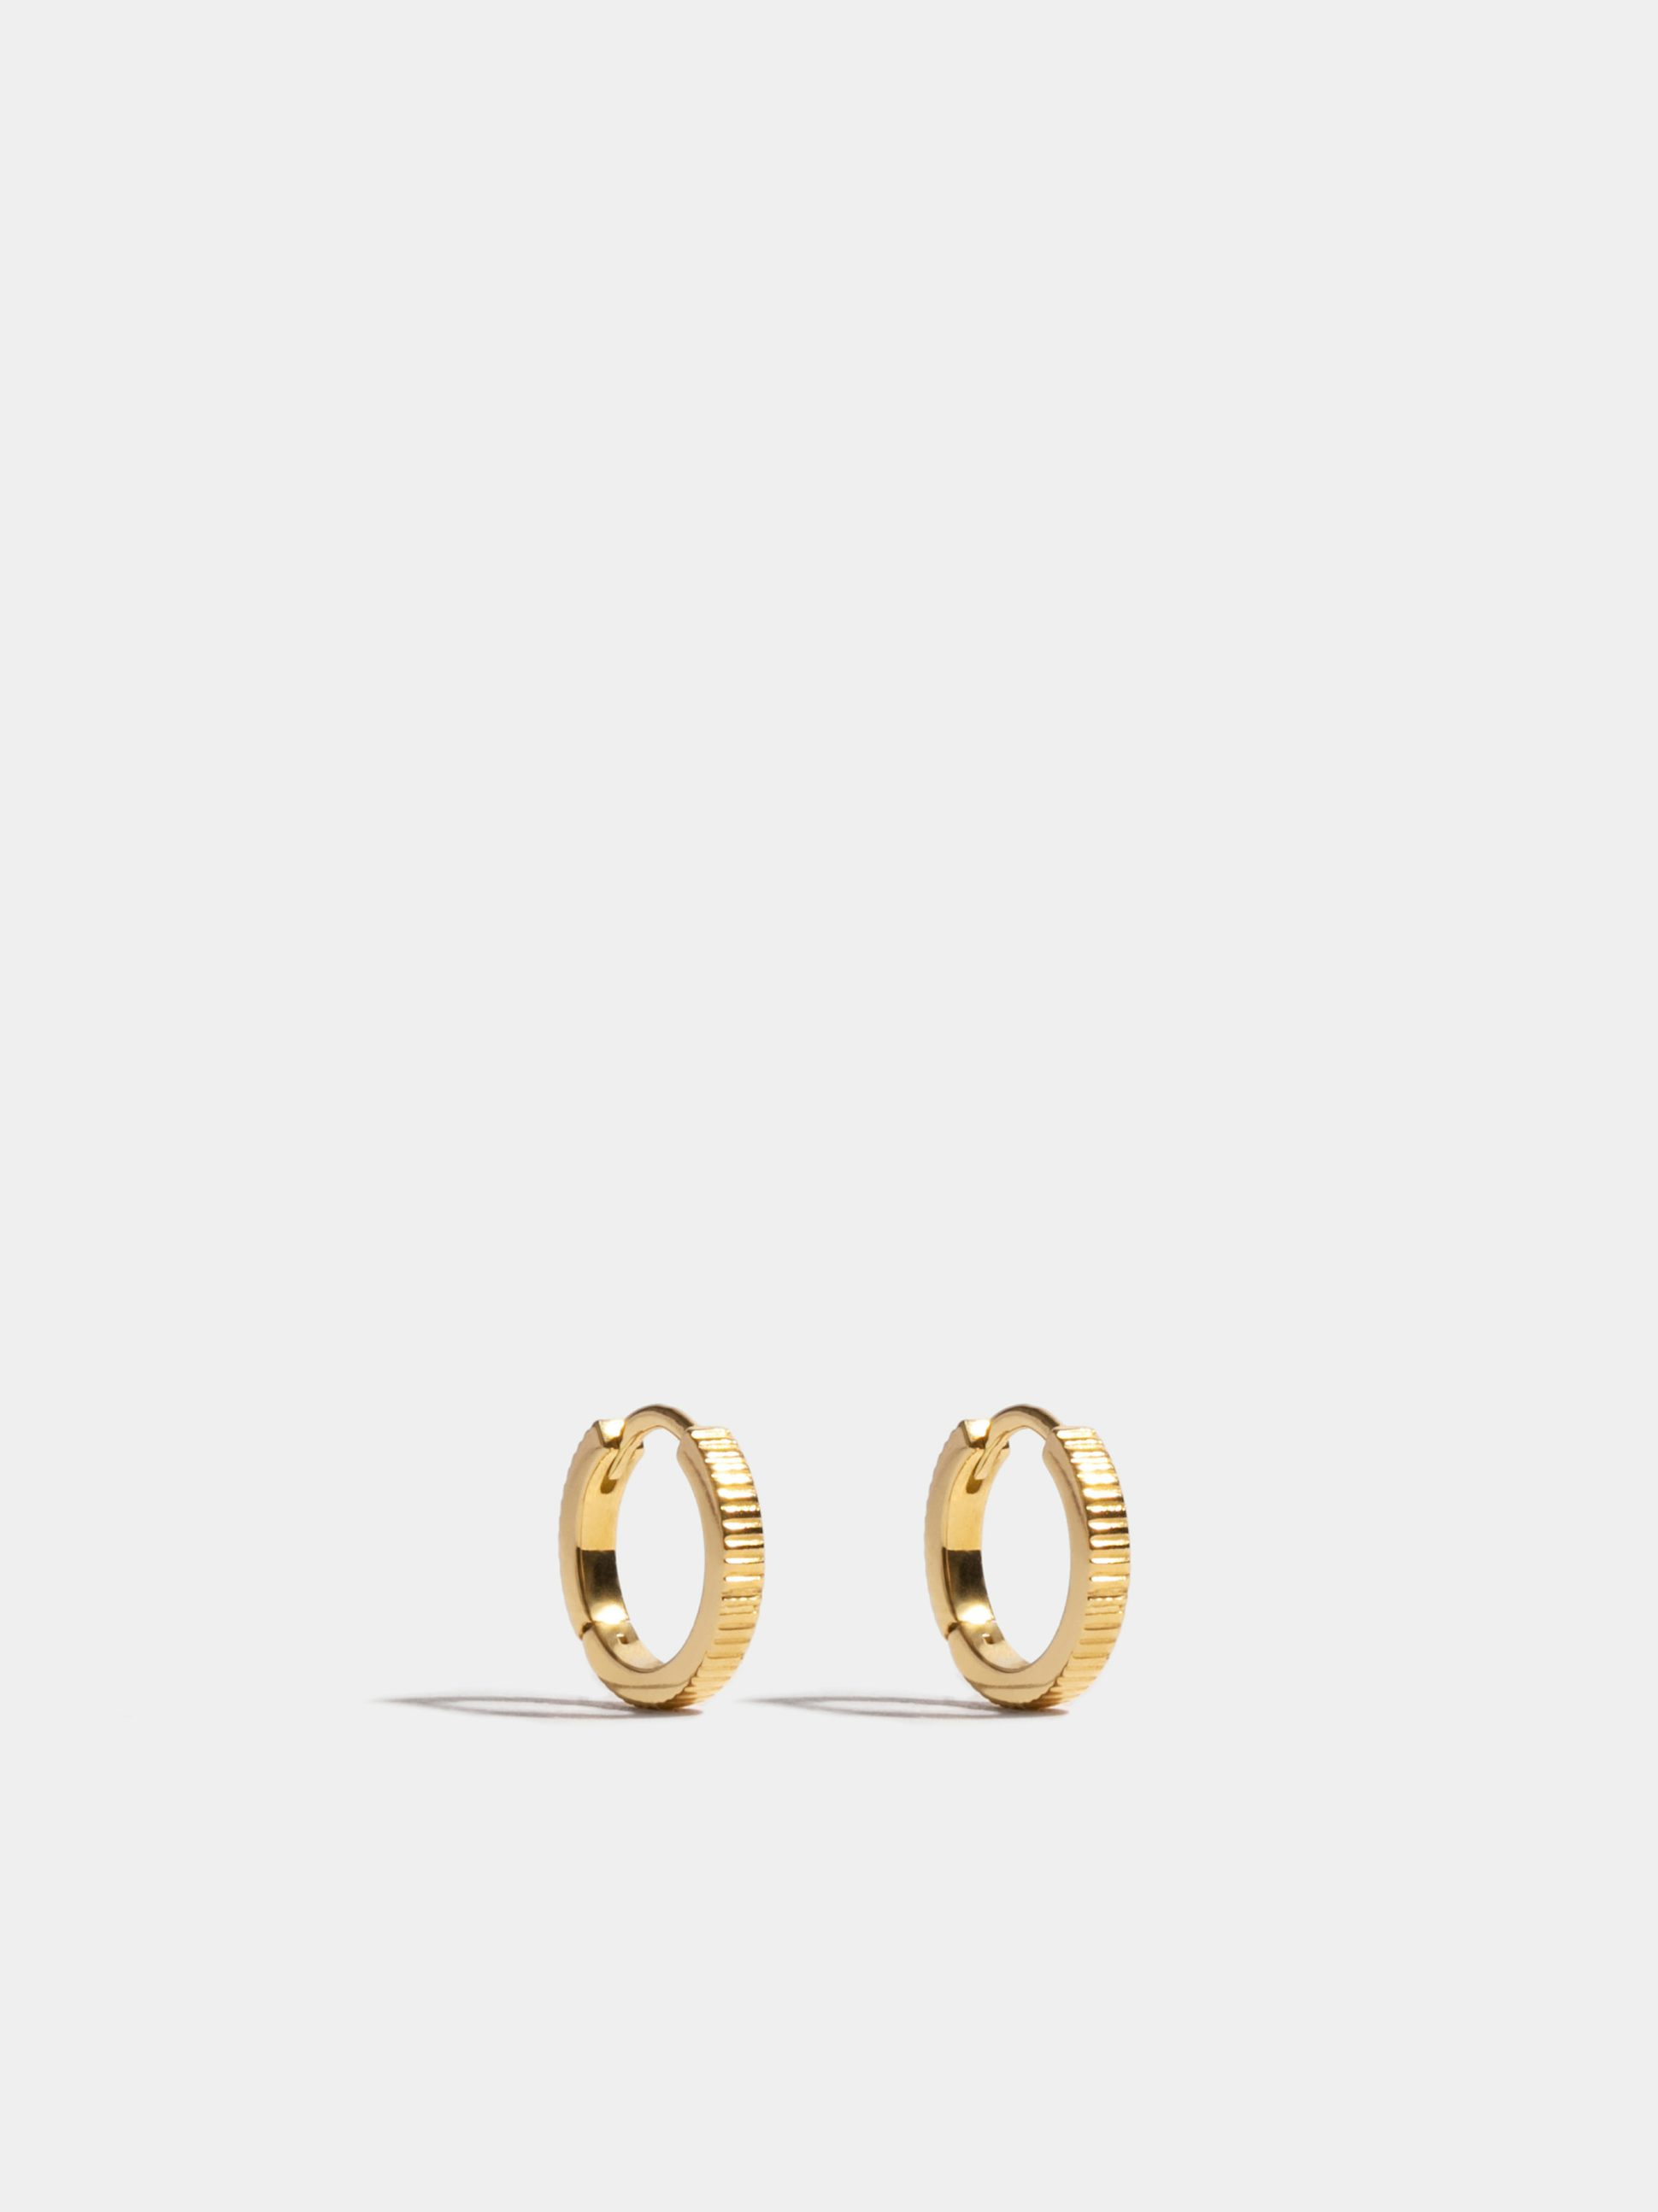 Anagramme ridges earrings in yellow gold 18k Fairmined ethical